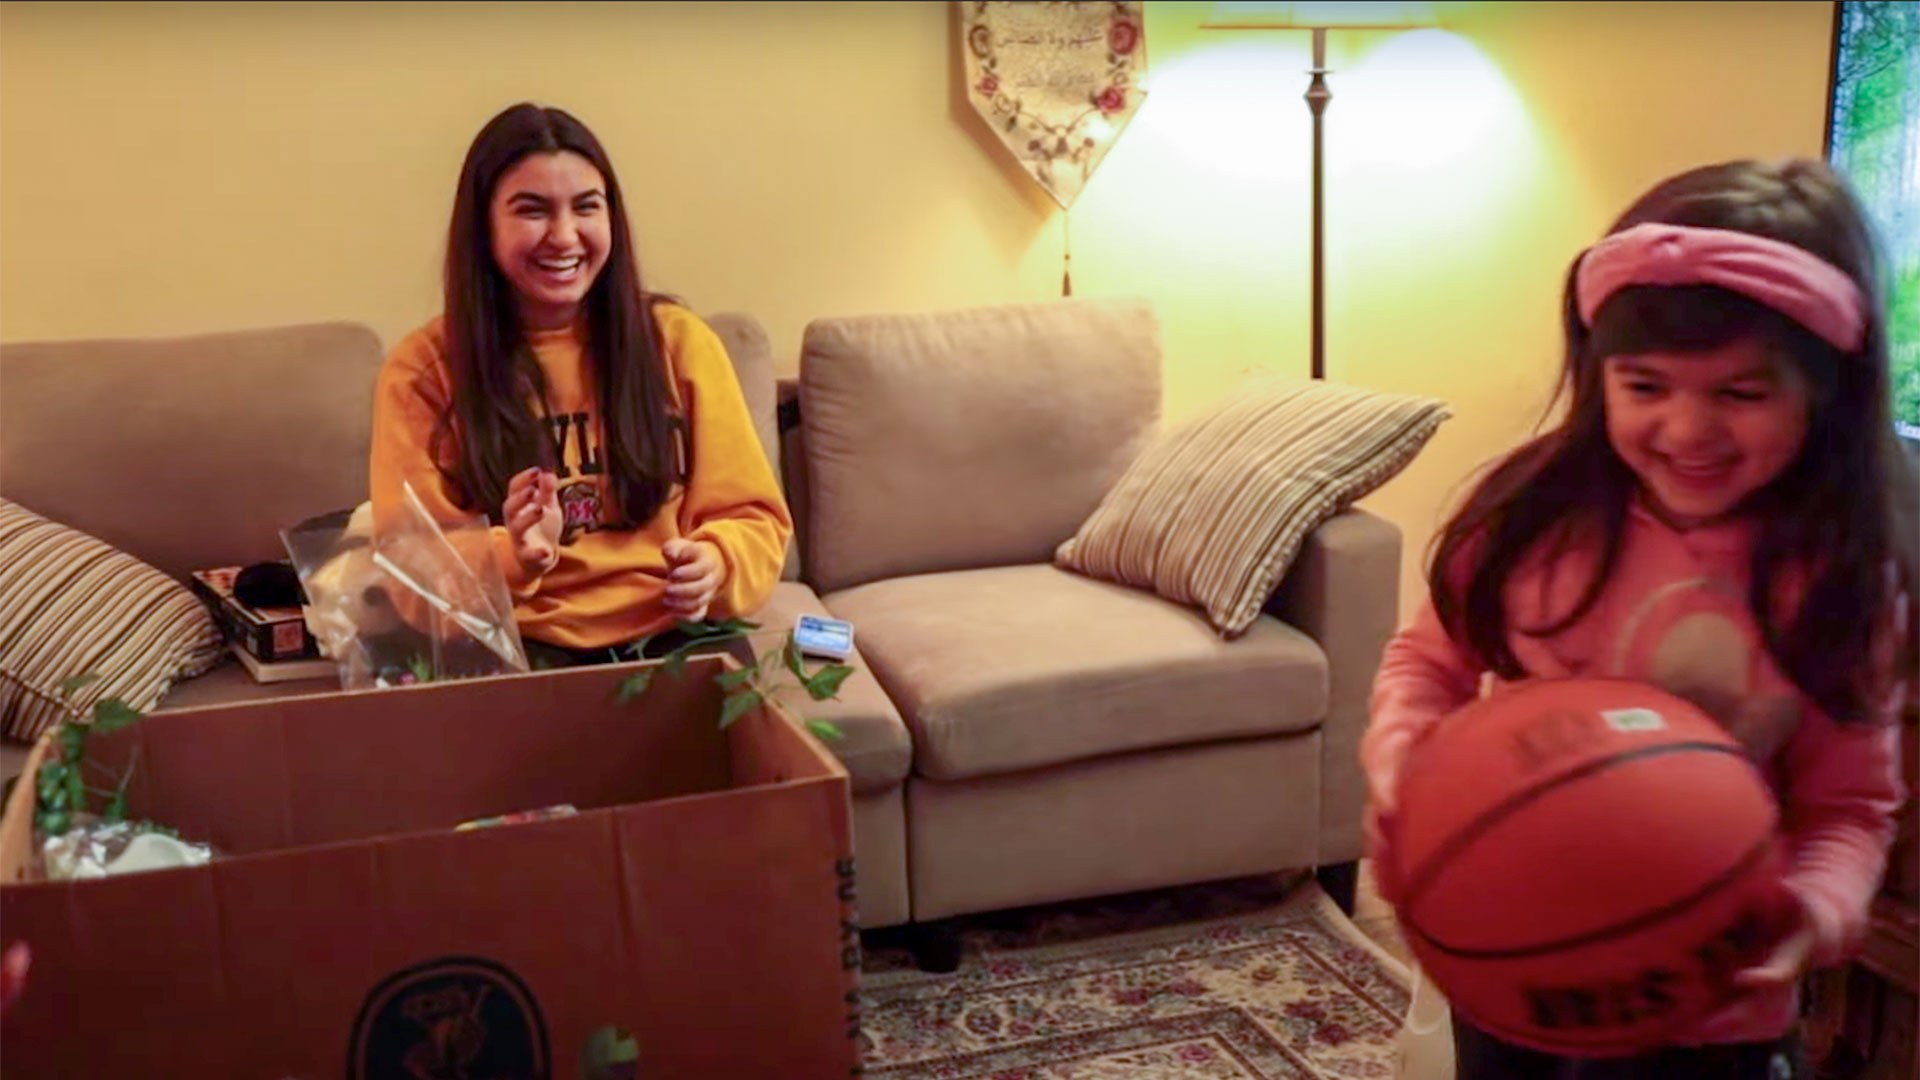  Sahar Afnan '24, a psychology and biological sciences major, visits a local refugee family as part of Peer to Peer's tutoring program. Since 2017, the organization has taught more than 300 students in Prince George's and Montgomery counties. Video and still by Peer to Peer.